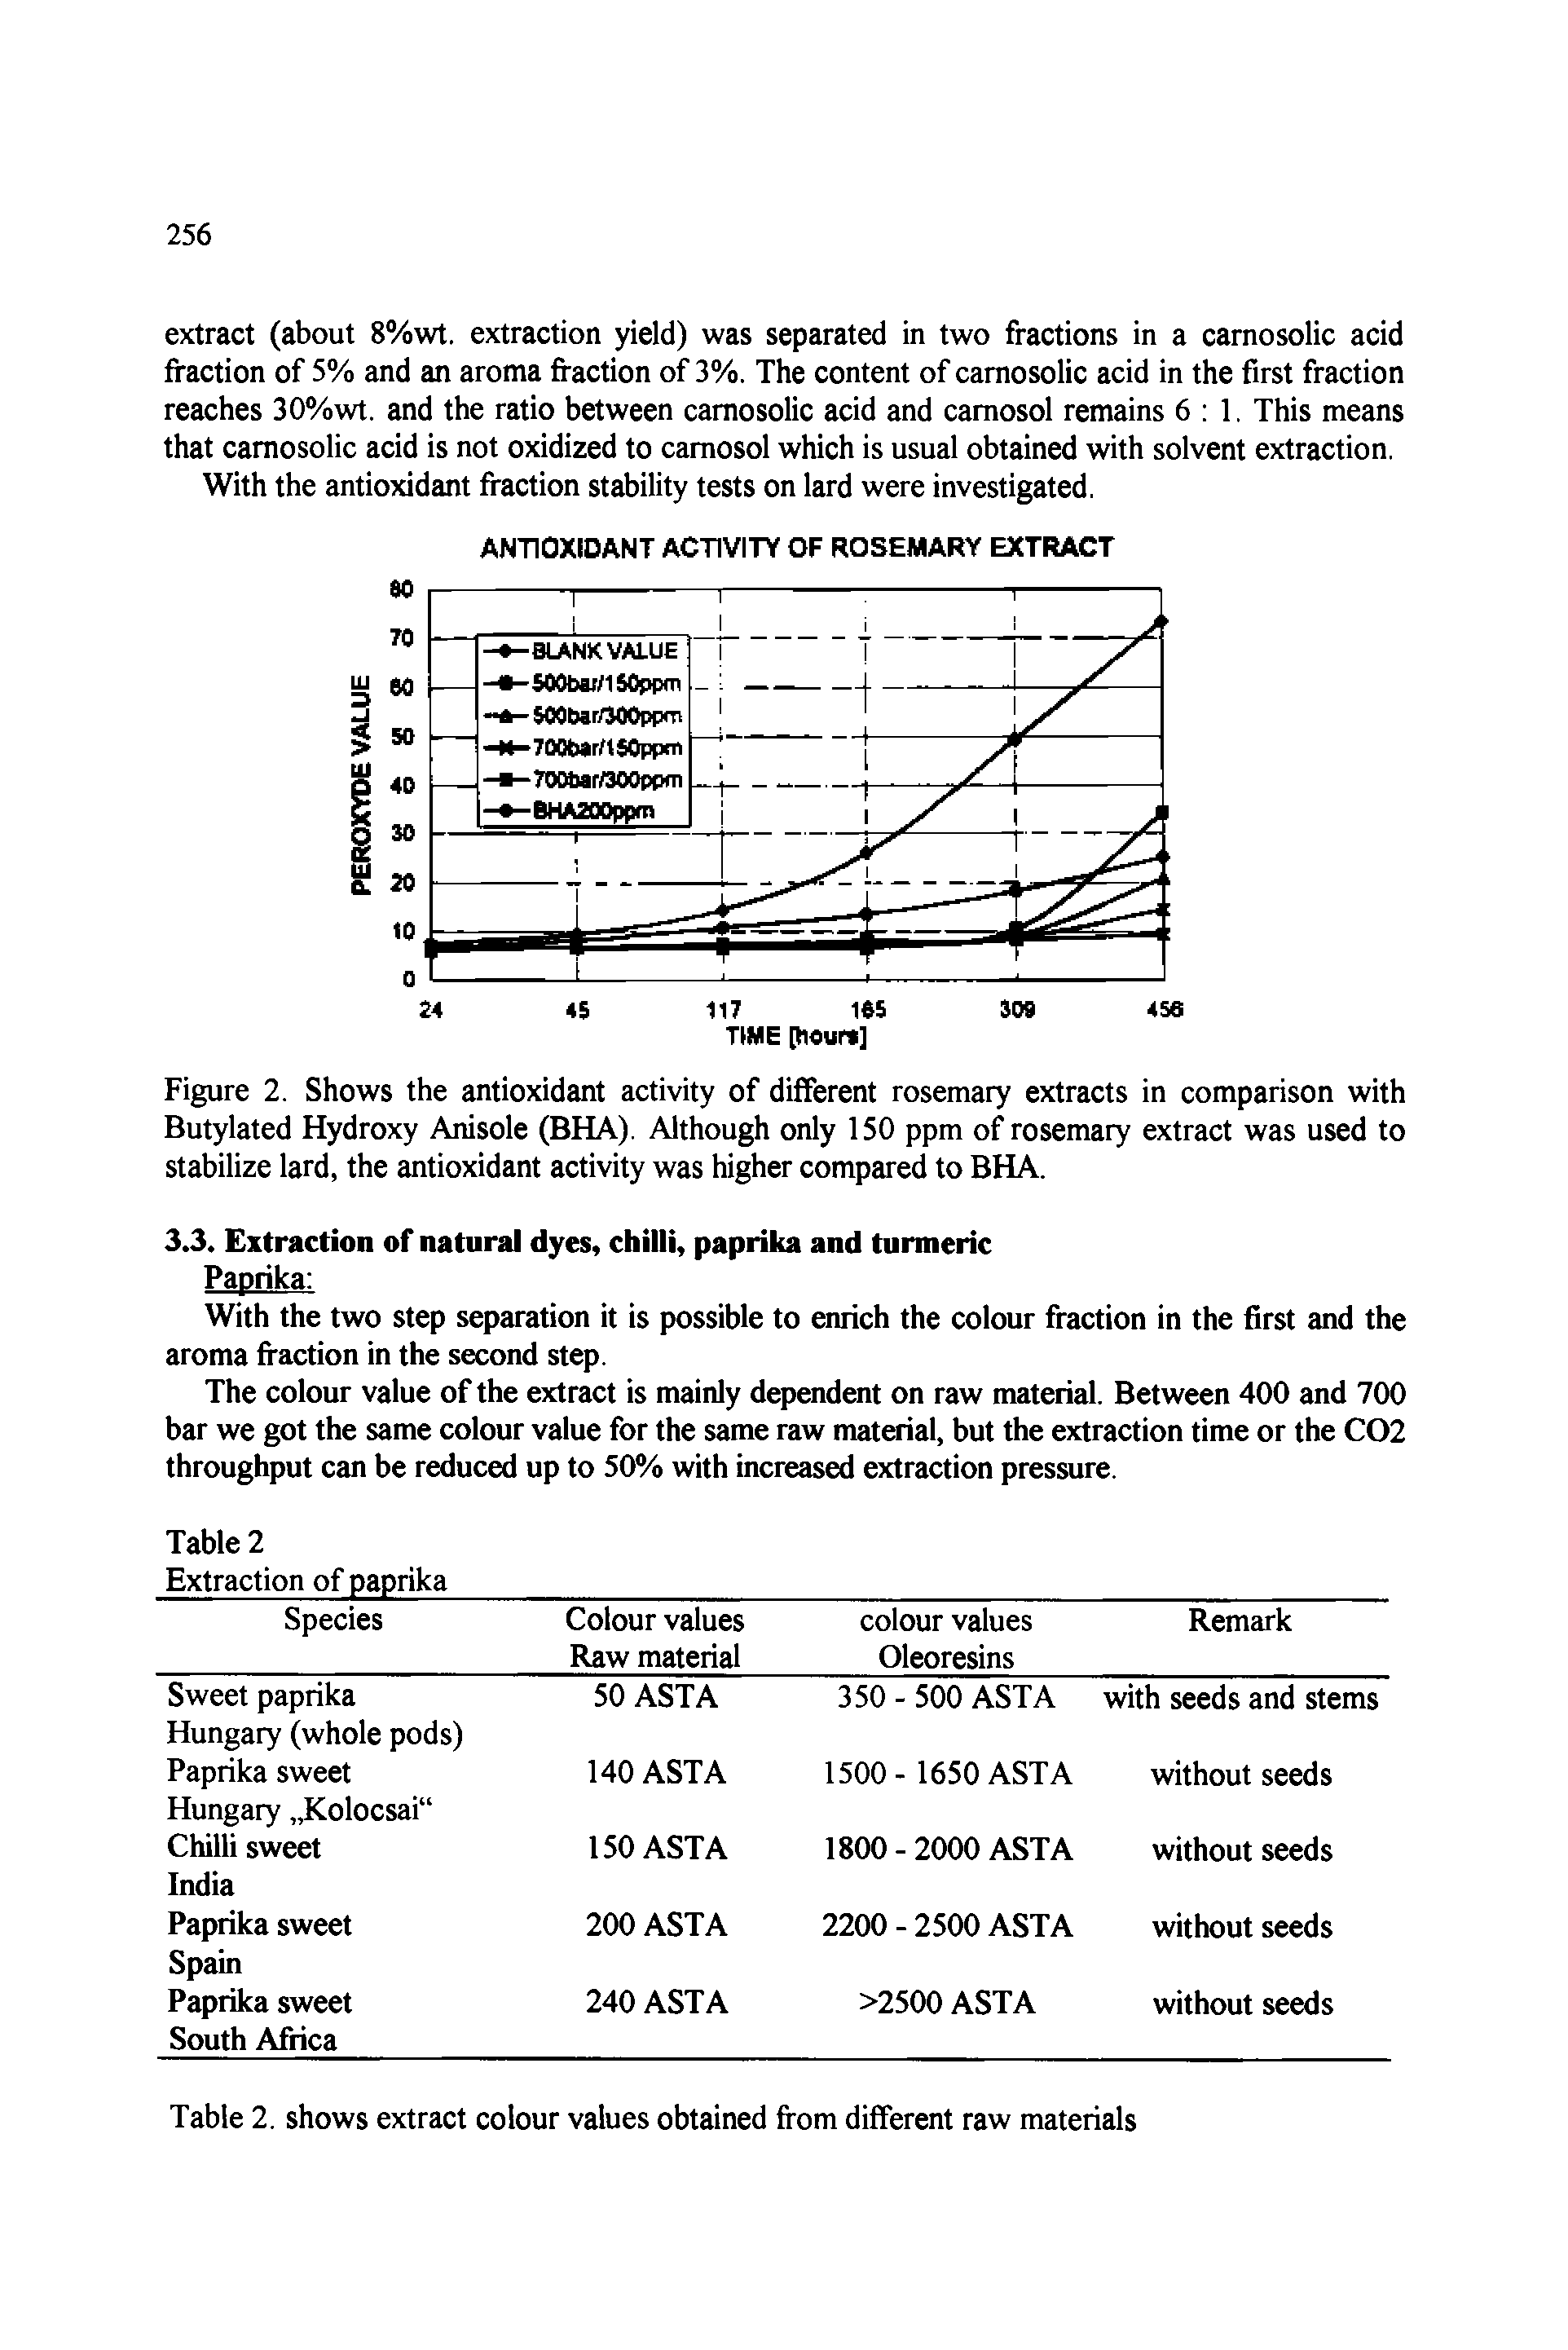 Figure 2. Shows the antioxidant activity of different rosemary extracts in comparison with Butylated Hydroxy Anisole (BHA). Although only 150 ppm of rosemary extract was used to stabilize lard, the antioxidant activity was higher compared to BHA.